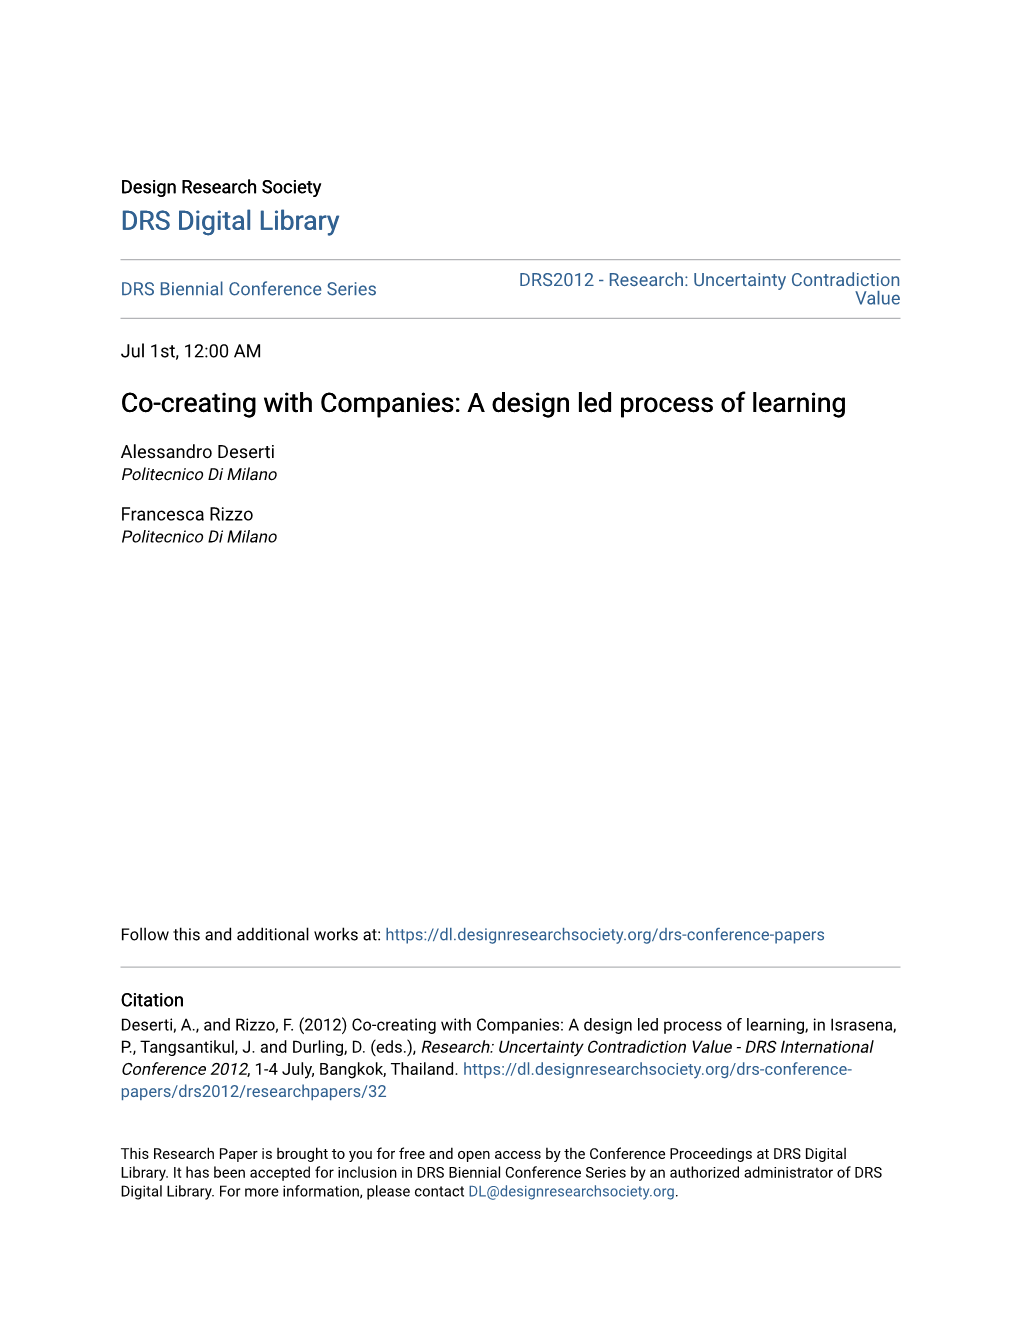 Co-Creating with Companies: a Design Led Process of Learning